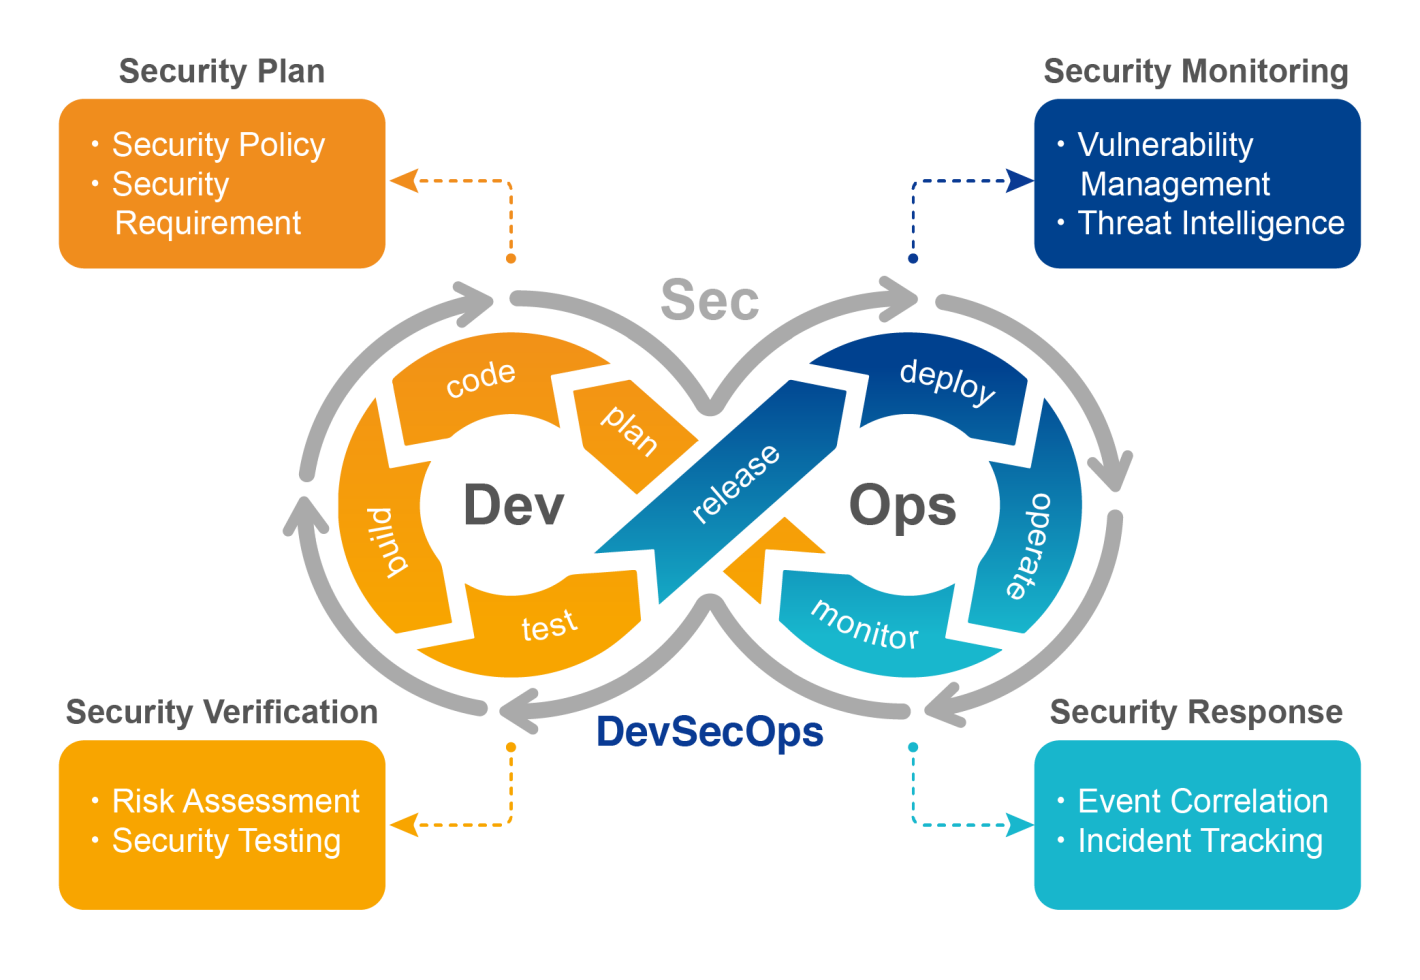 The combination of SecFlow and DevSecOps